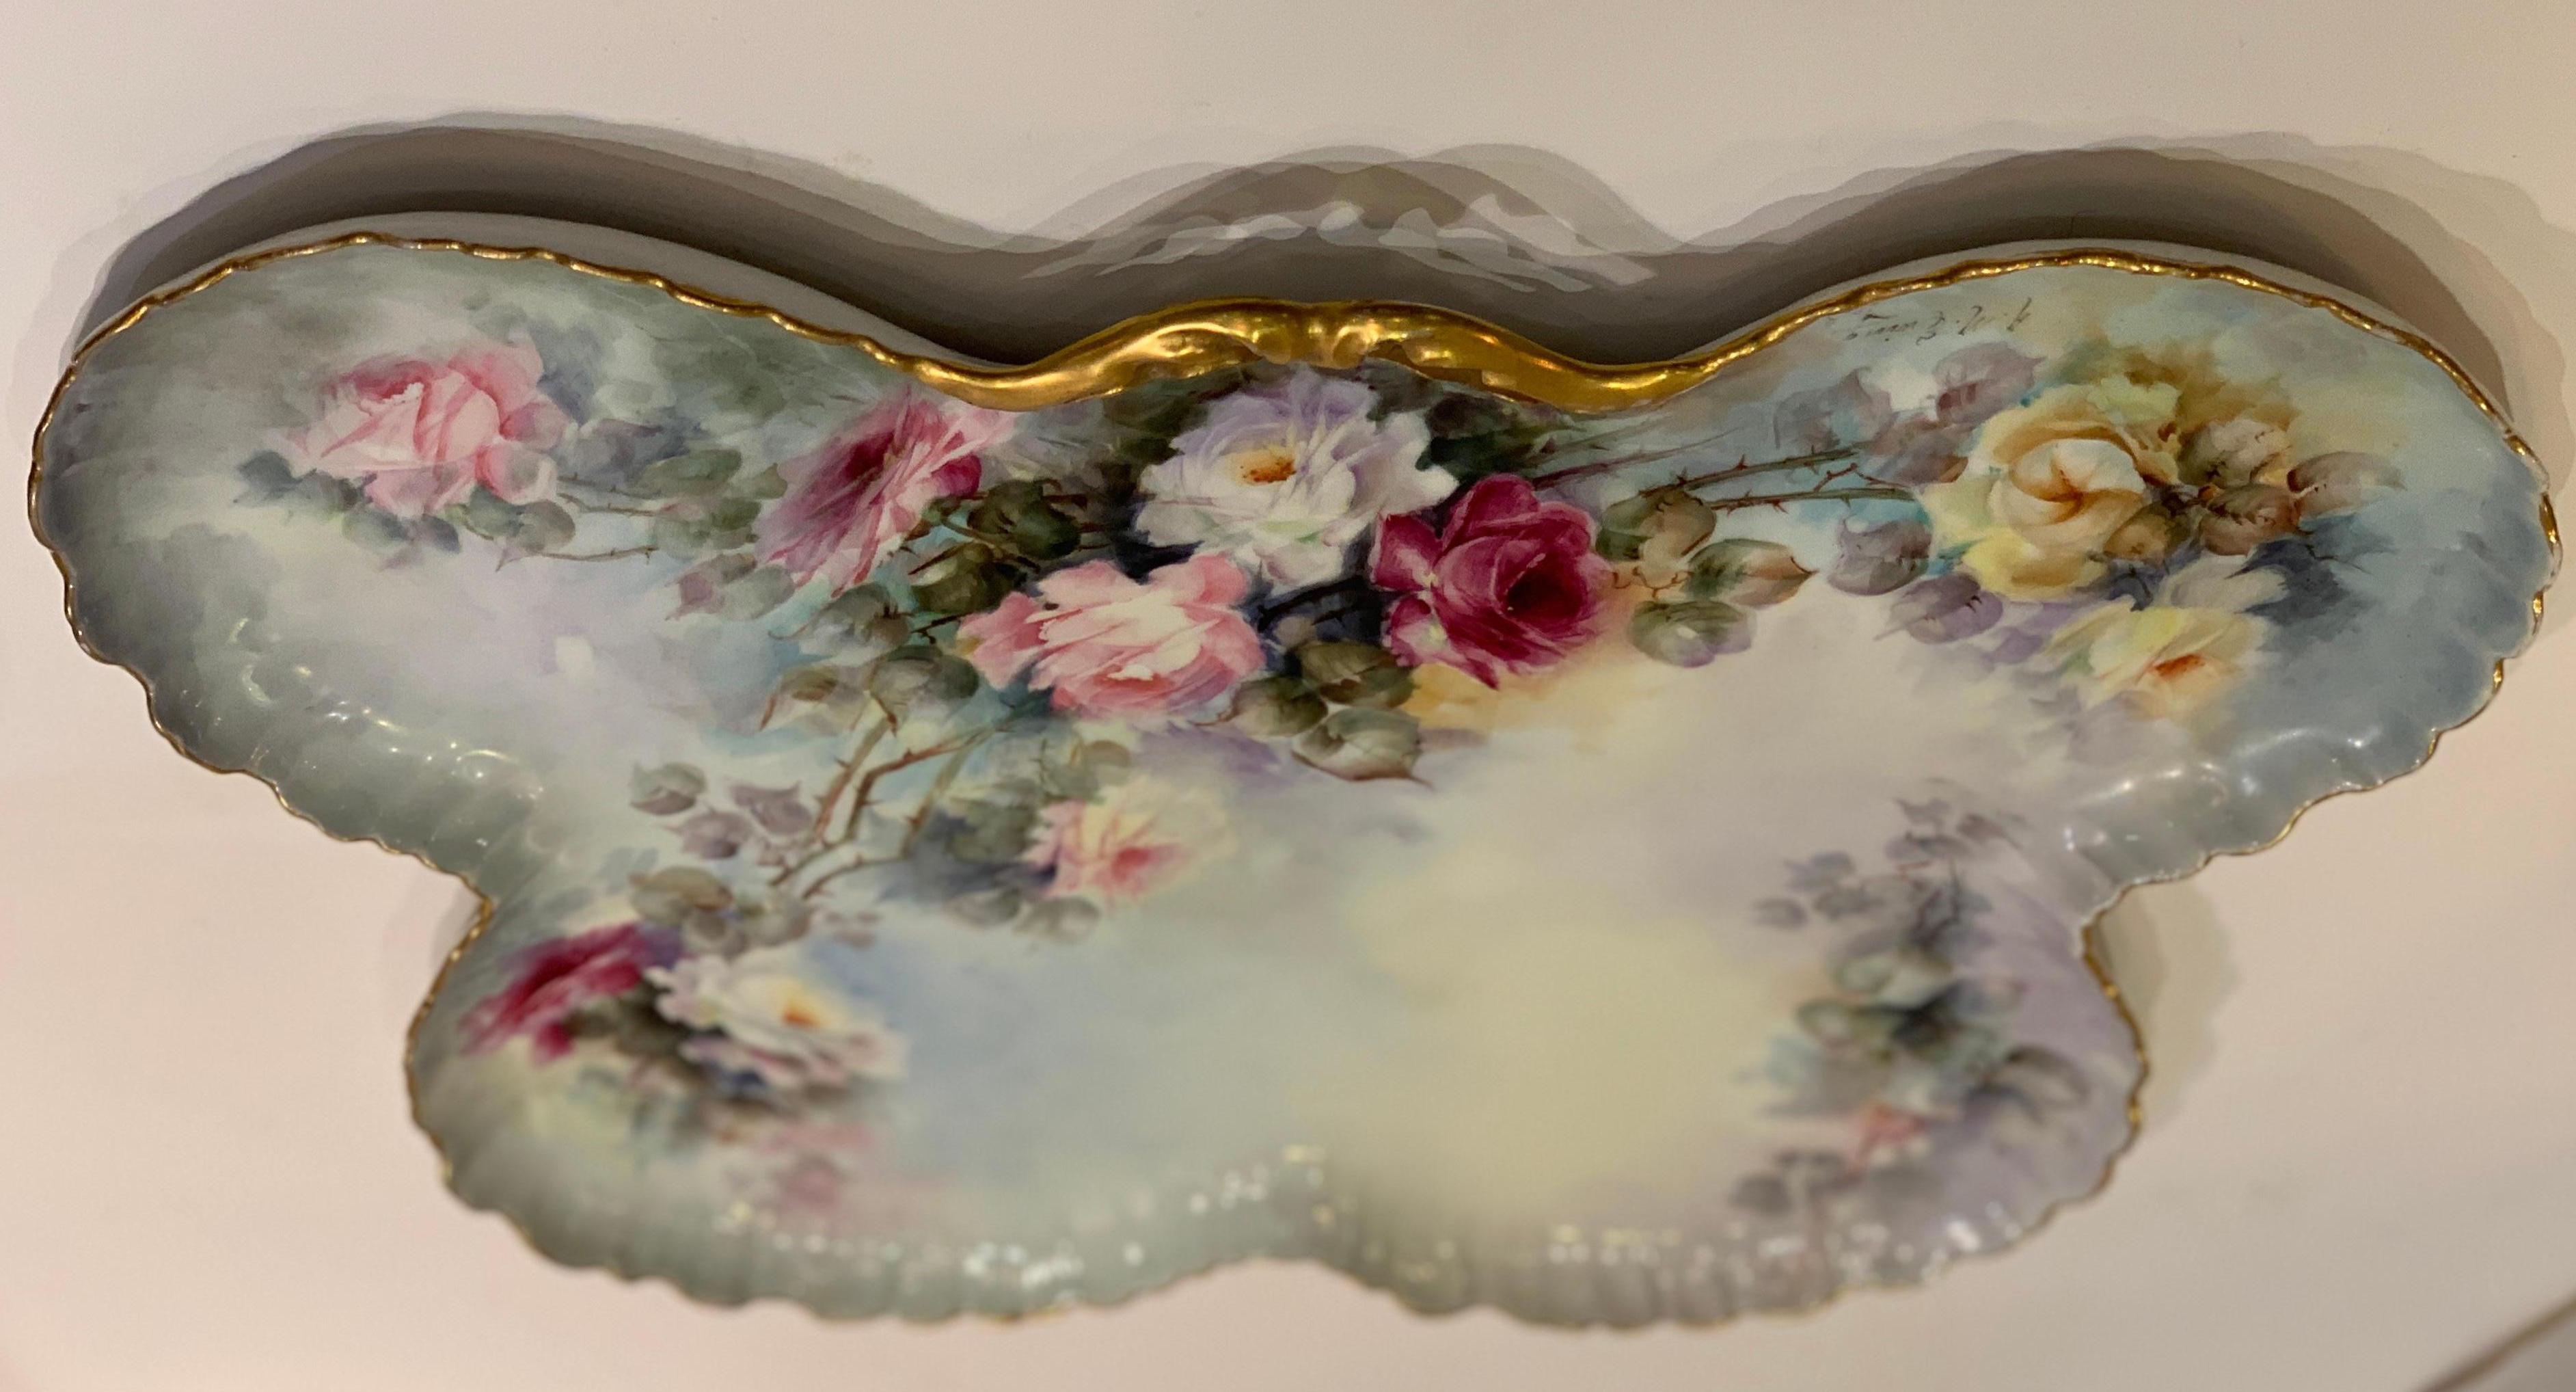 Beautiful handmade and hand painted, very large antique porcelain dresser or vanity tray or platter by JPL Jean Pouyat Limoges France is signed by the artist, 